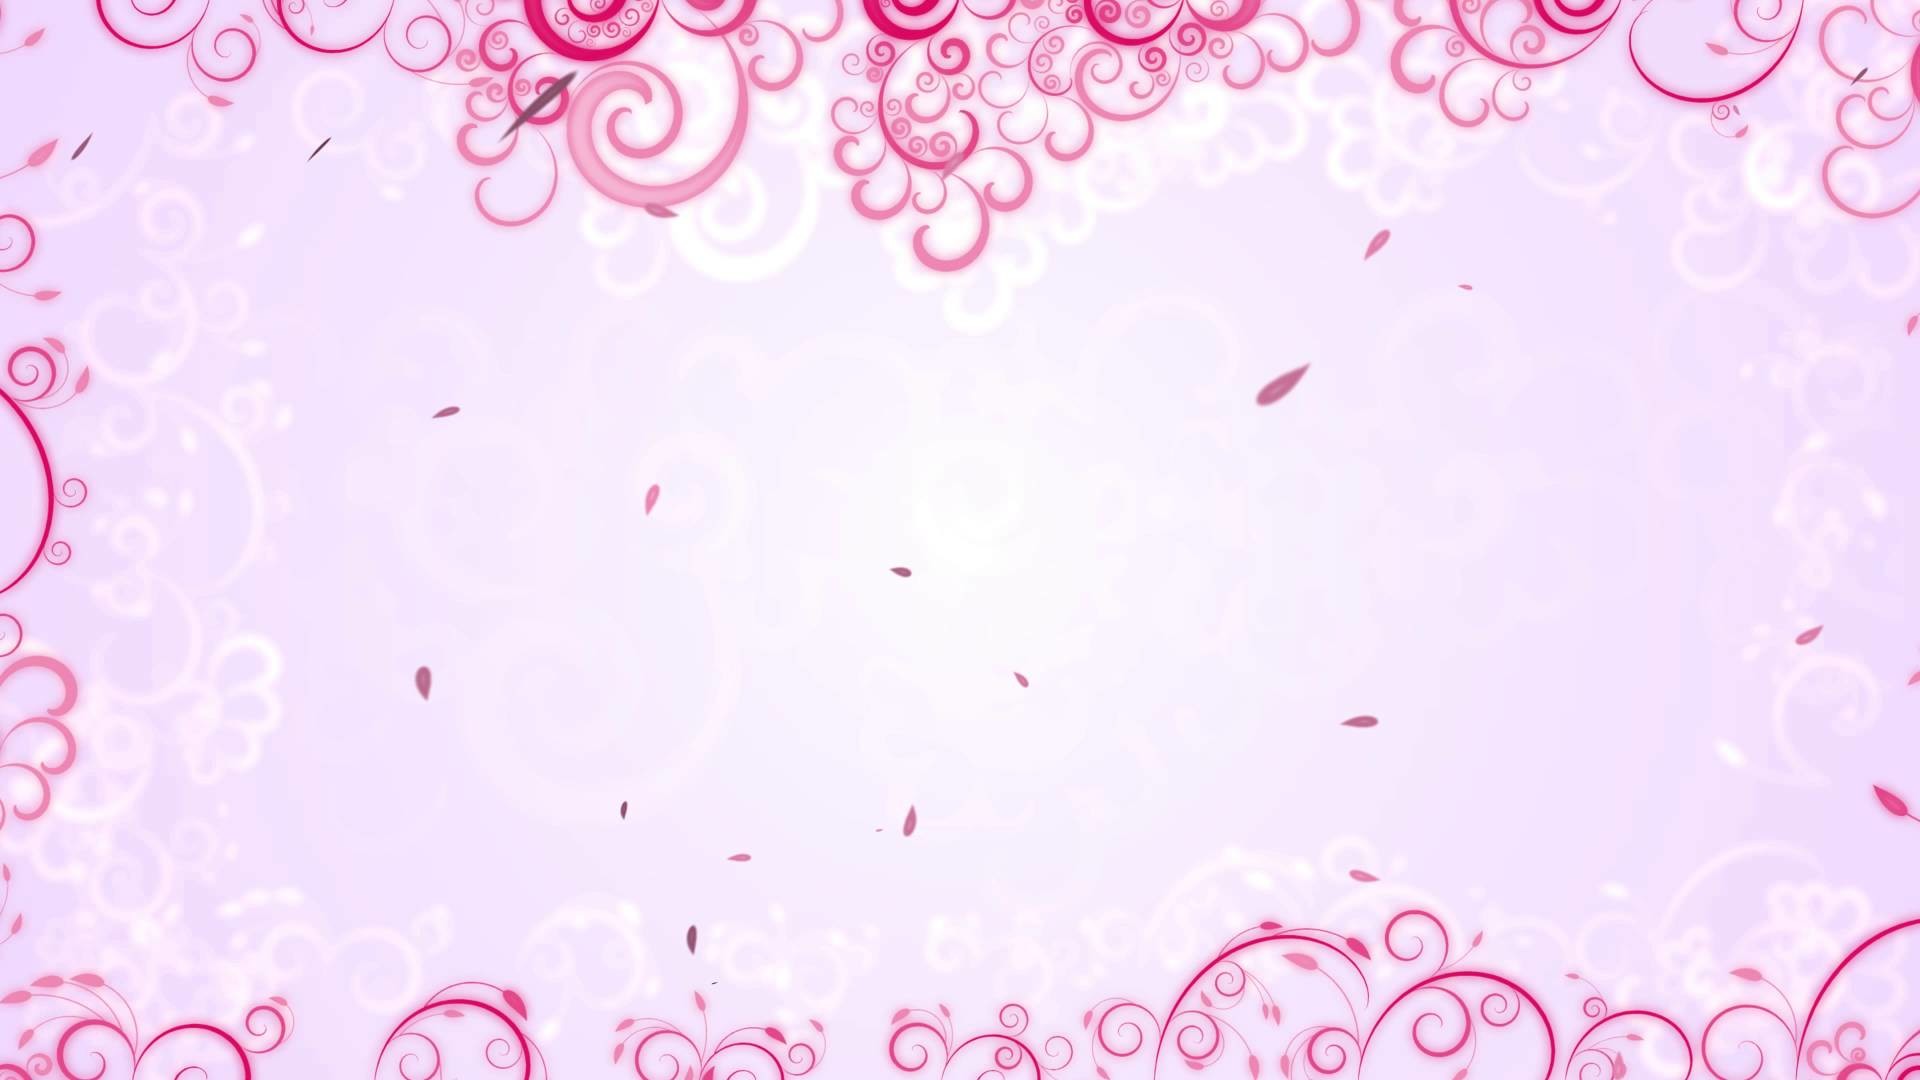 1920x1080 4k White Pink Fl. Animated Flower Backgrounds Clipart Collection